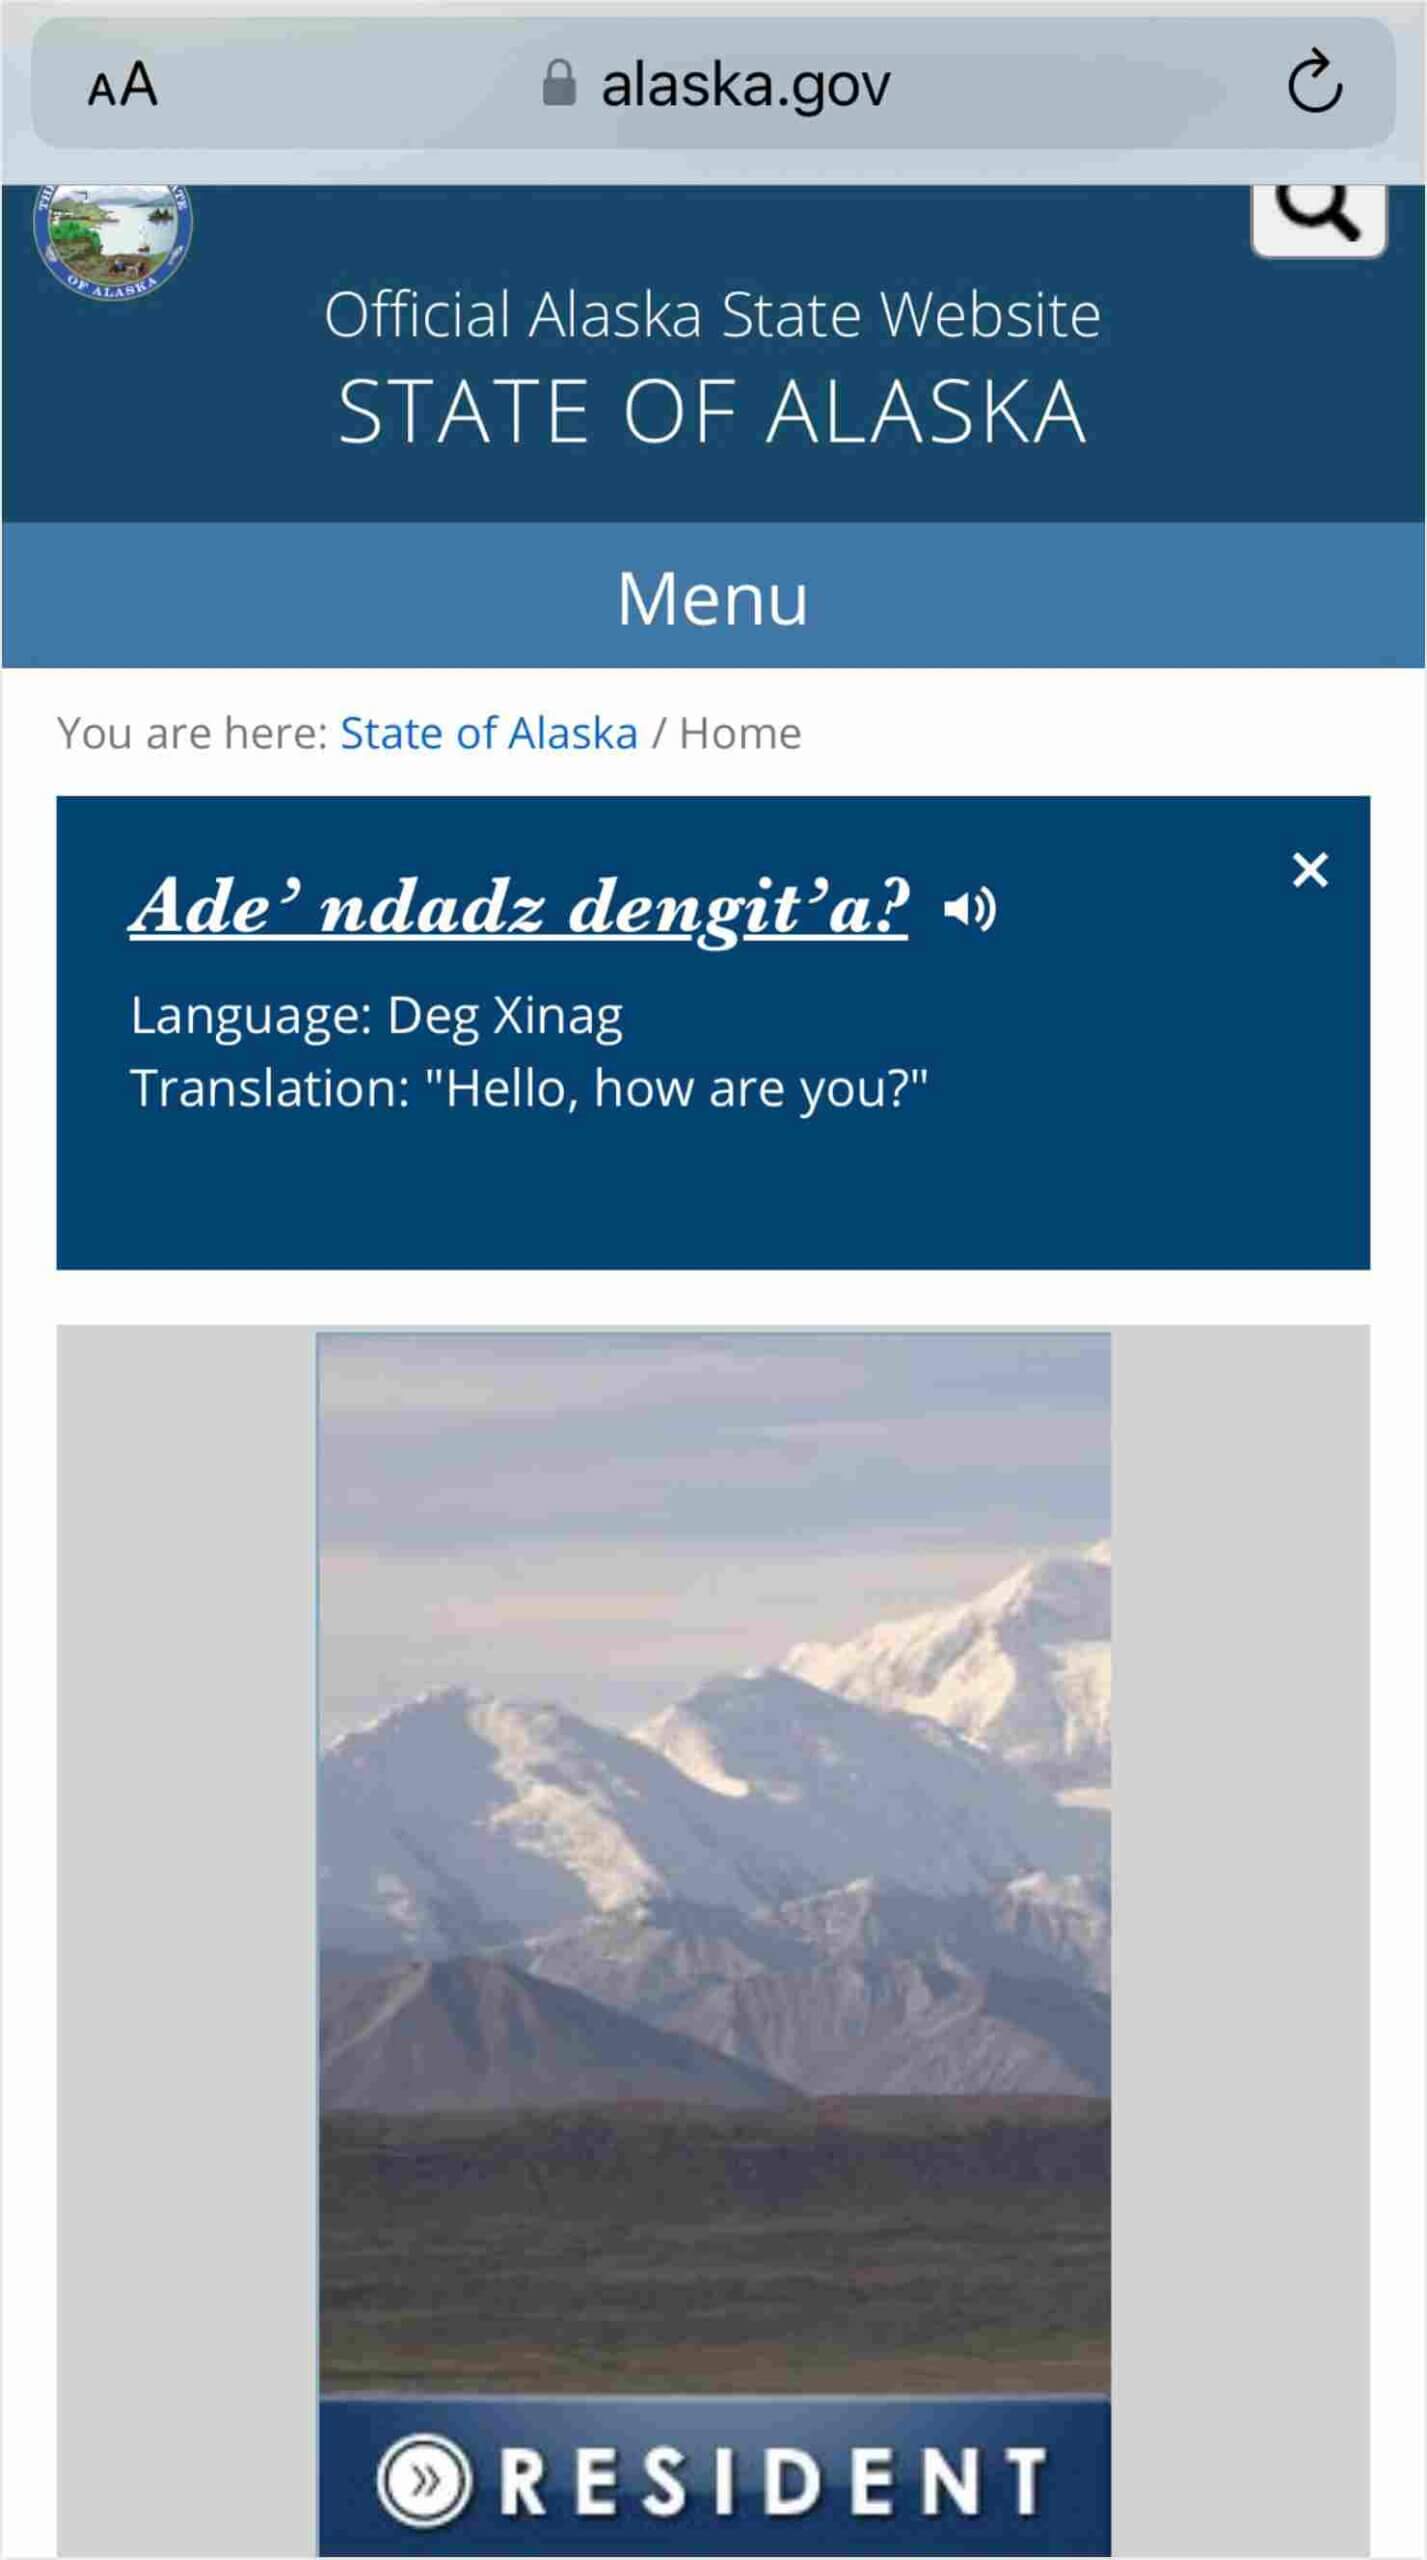 Mobile screenshot of the Alaska State Website arranged in a single-column layout. At the top, there's the state's seal followed by the site’s title. A greeting in Deg Xinag and its English translation are prominently displayed. Below, a scenic view of Alaskan mountains is visible, leading to a navigation bar for 'RESIDENT' suggesting further content below.